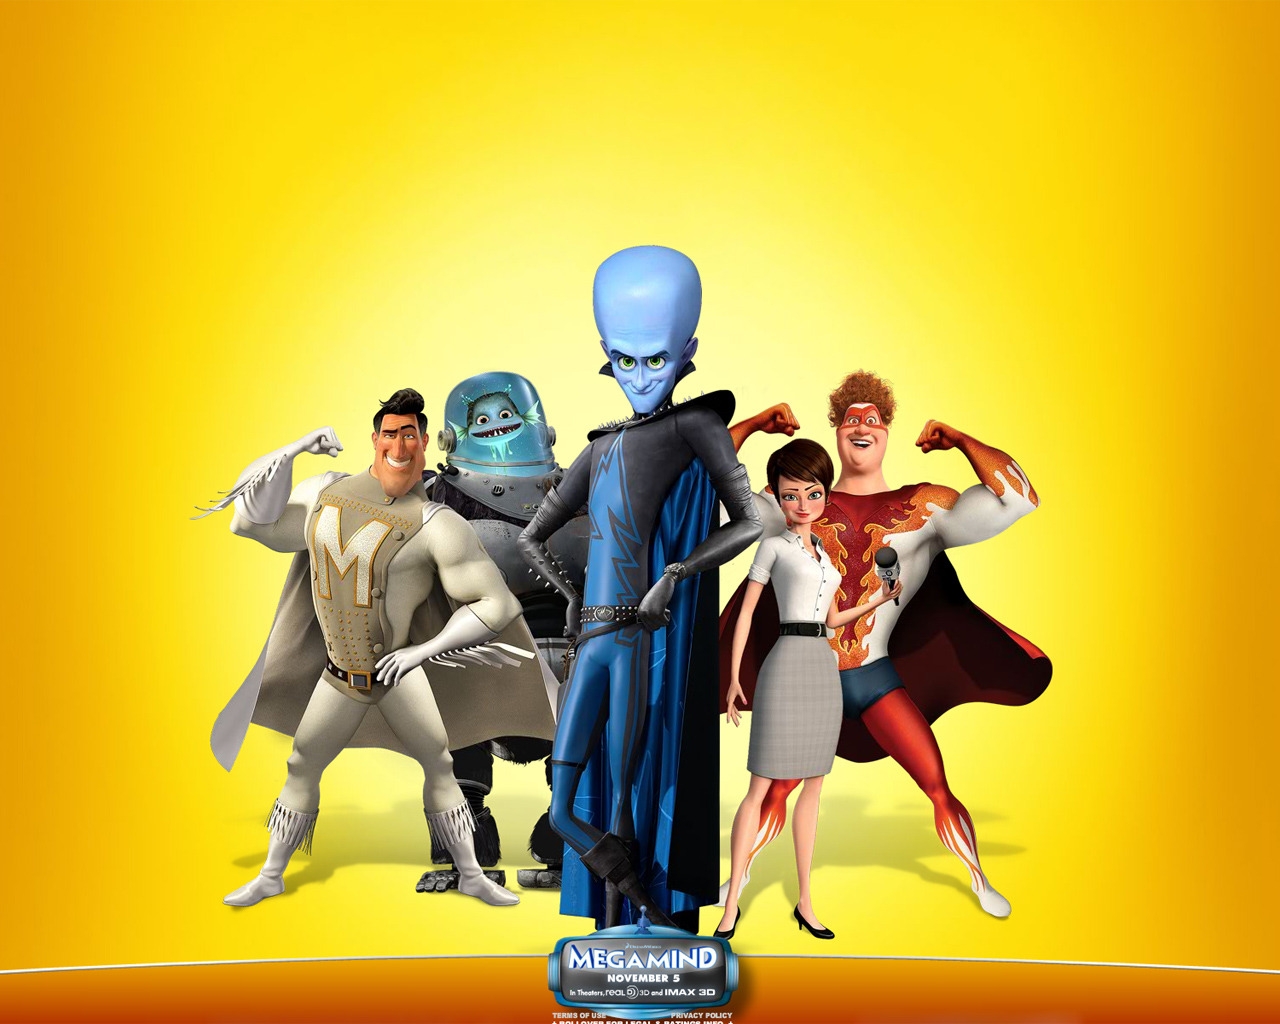 Megamind Movie for 1280 x 1024 resolution